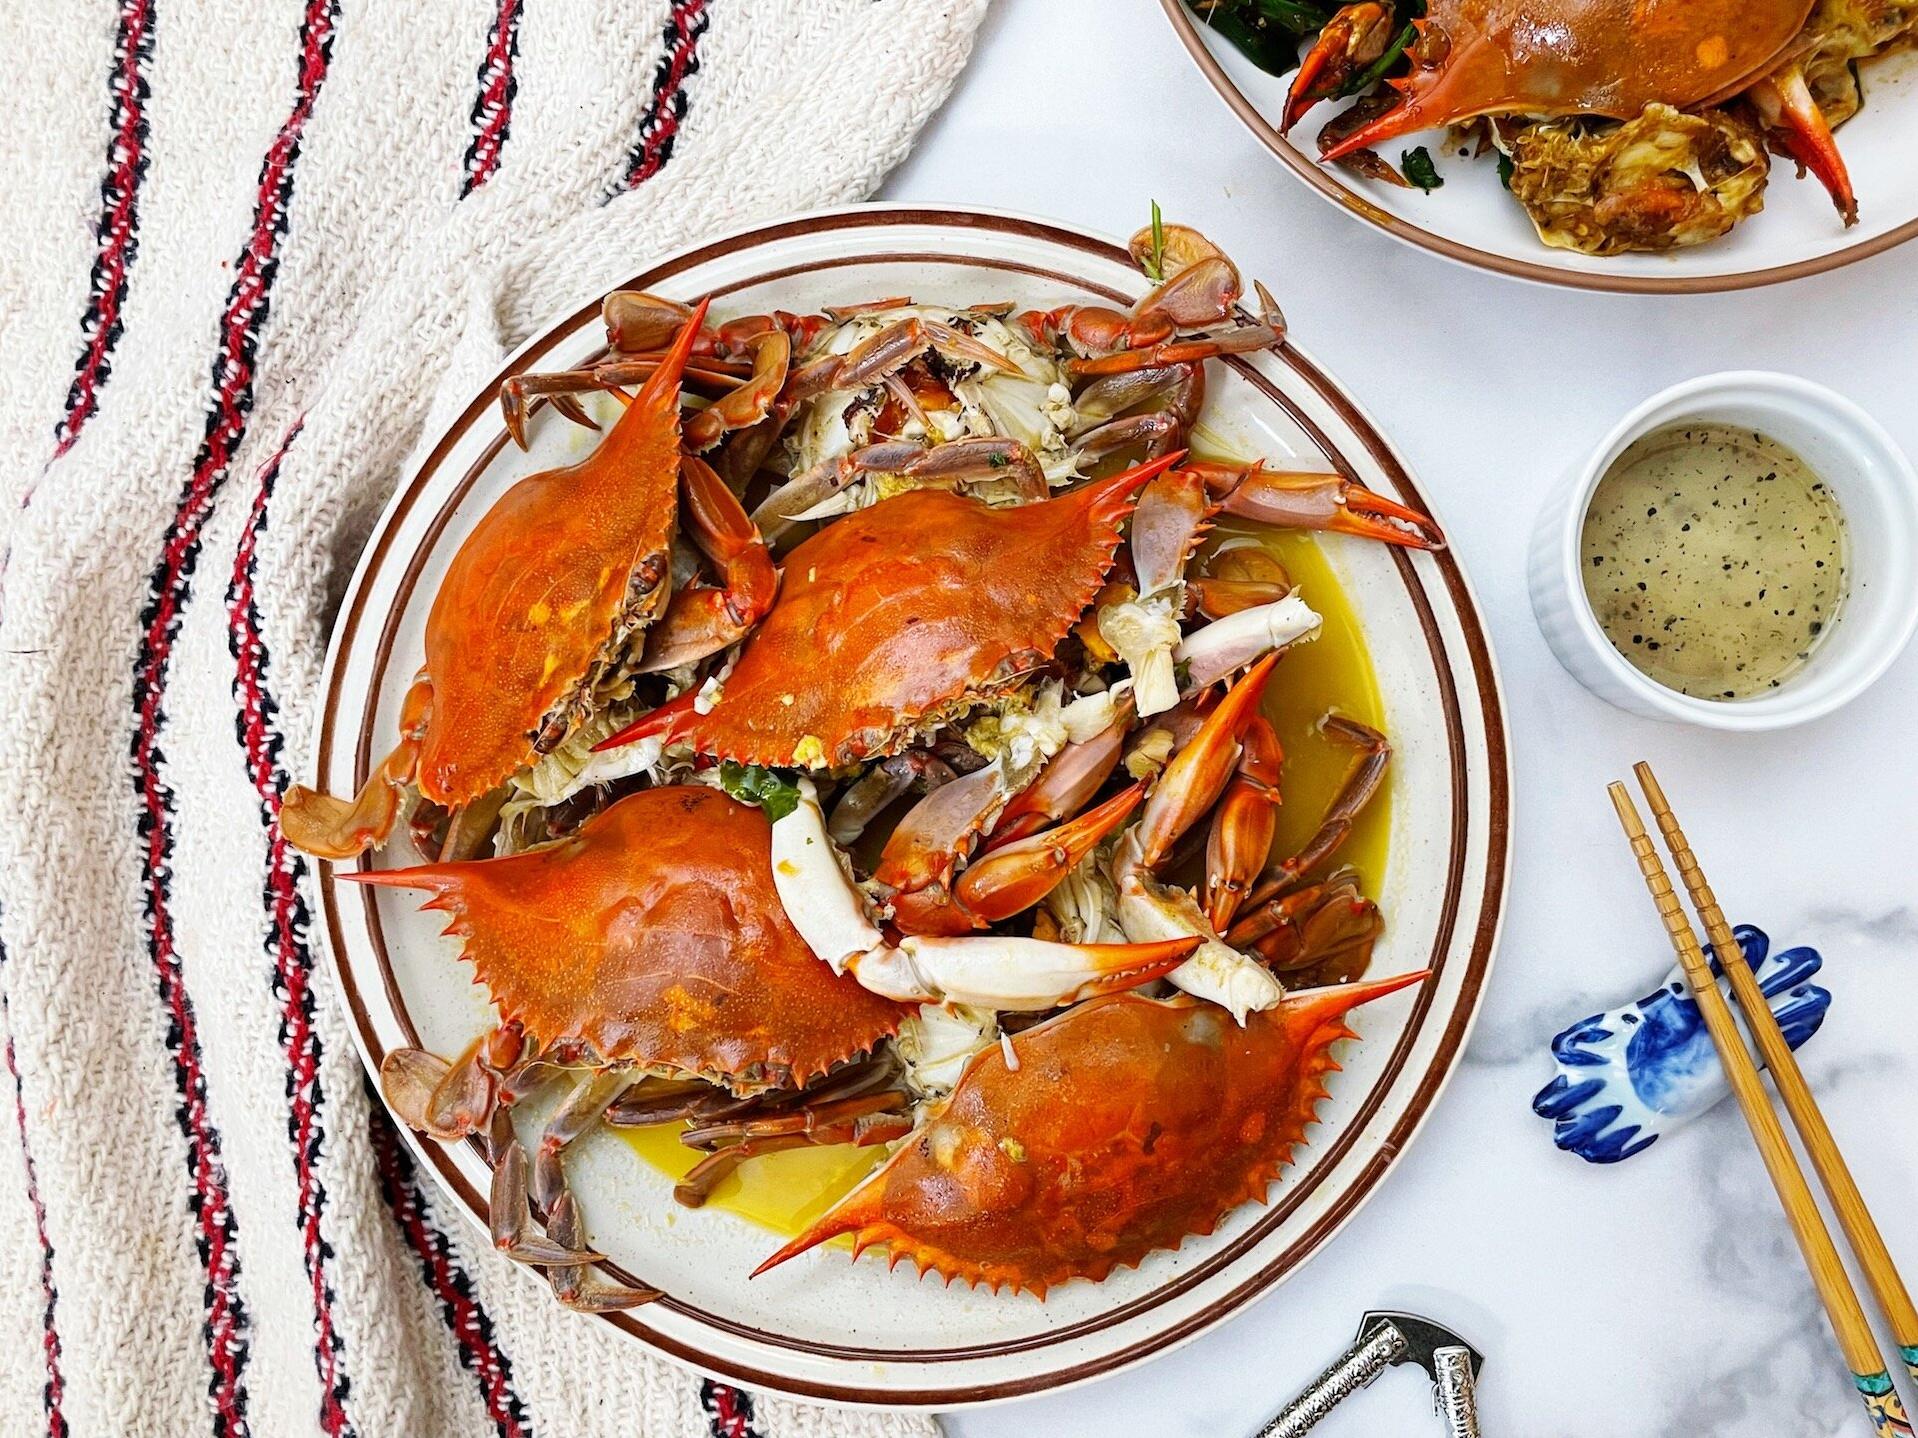  Heat up your kitchen with this fiery crab dish